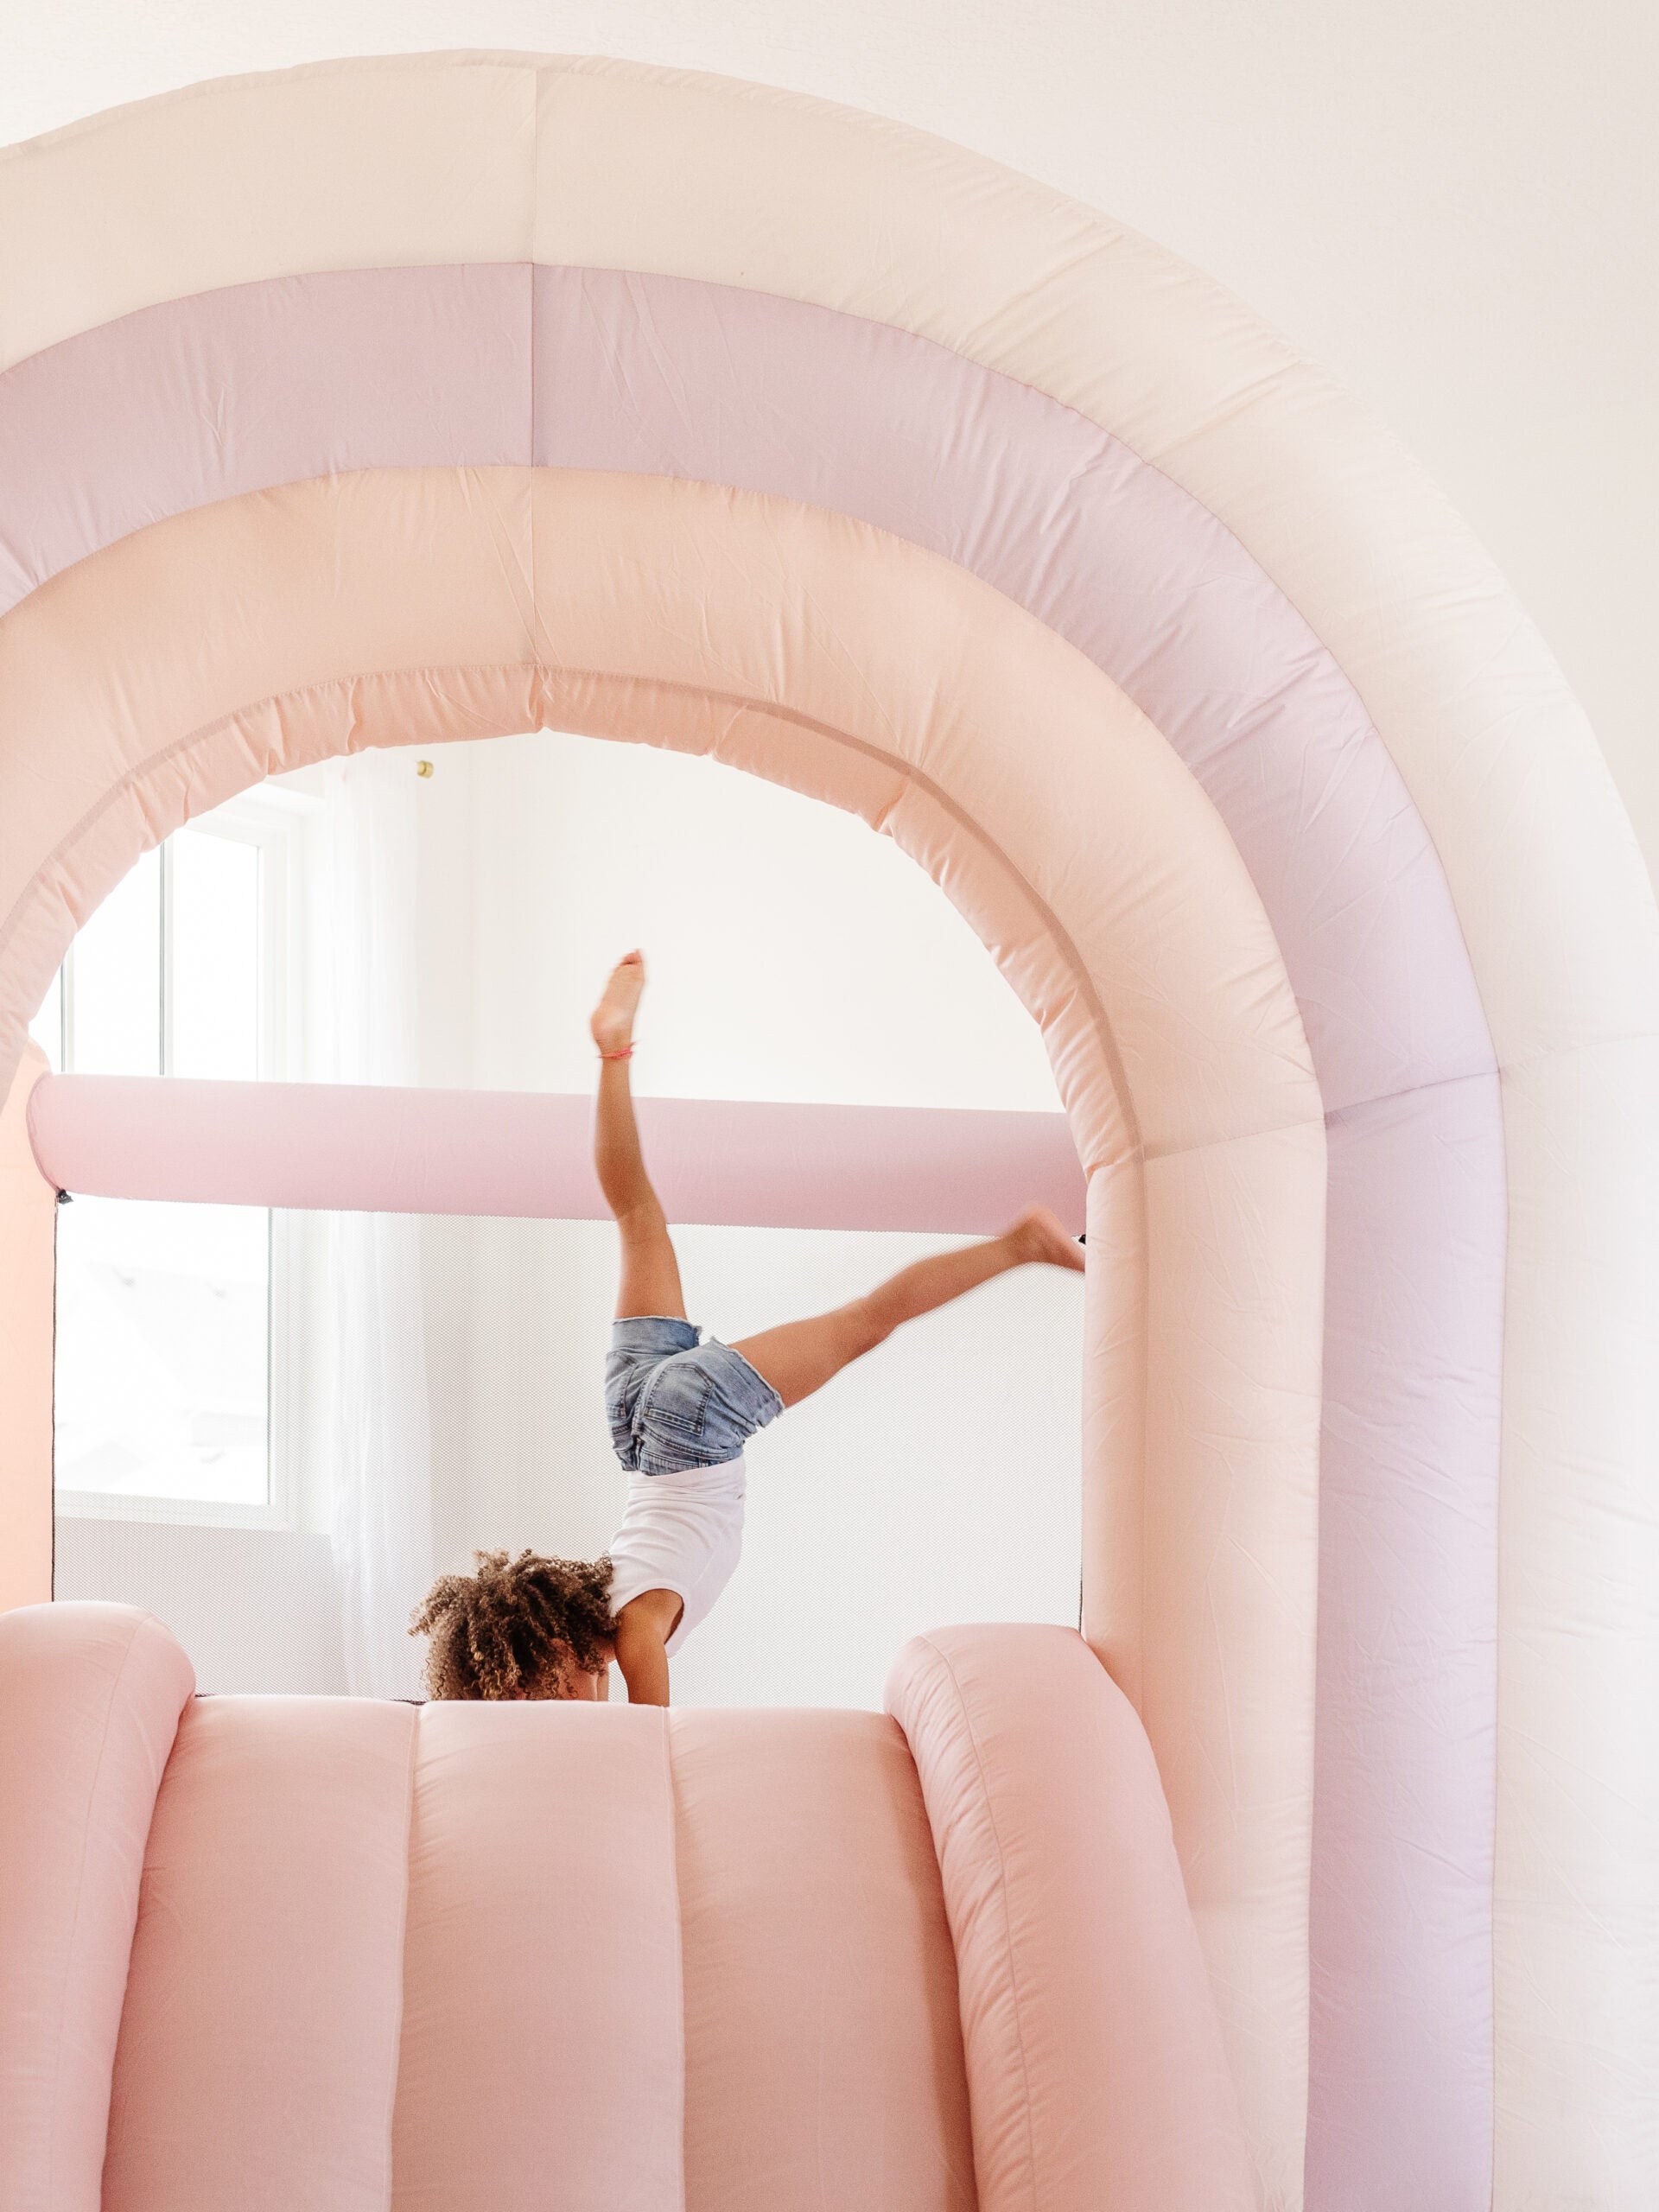 A Chic Bounce House Does Exist, and It's Worth Every Penny